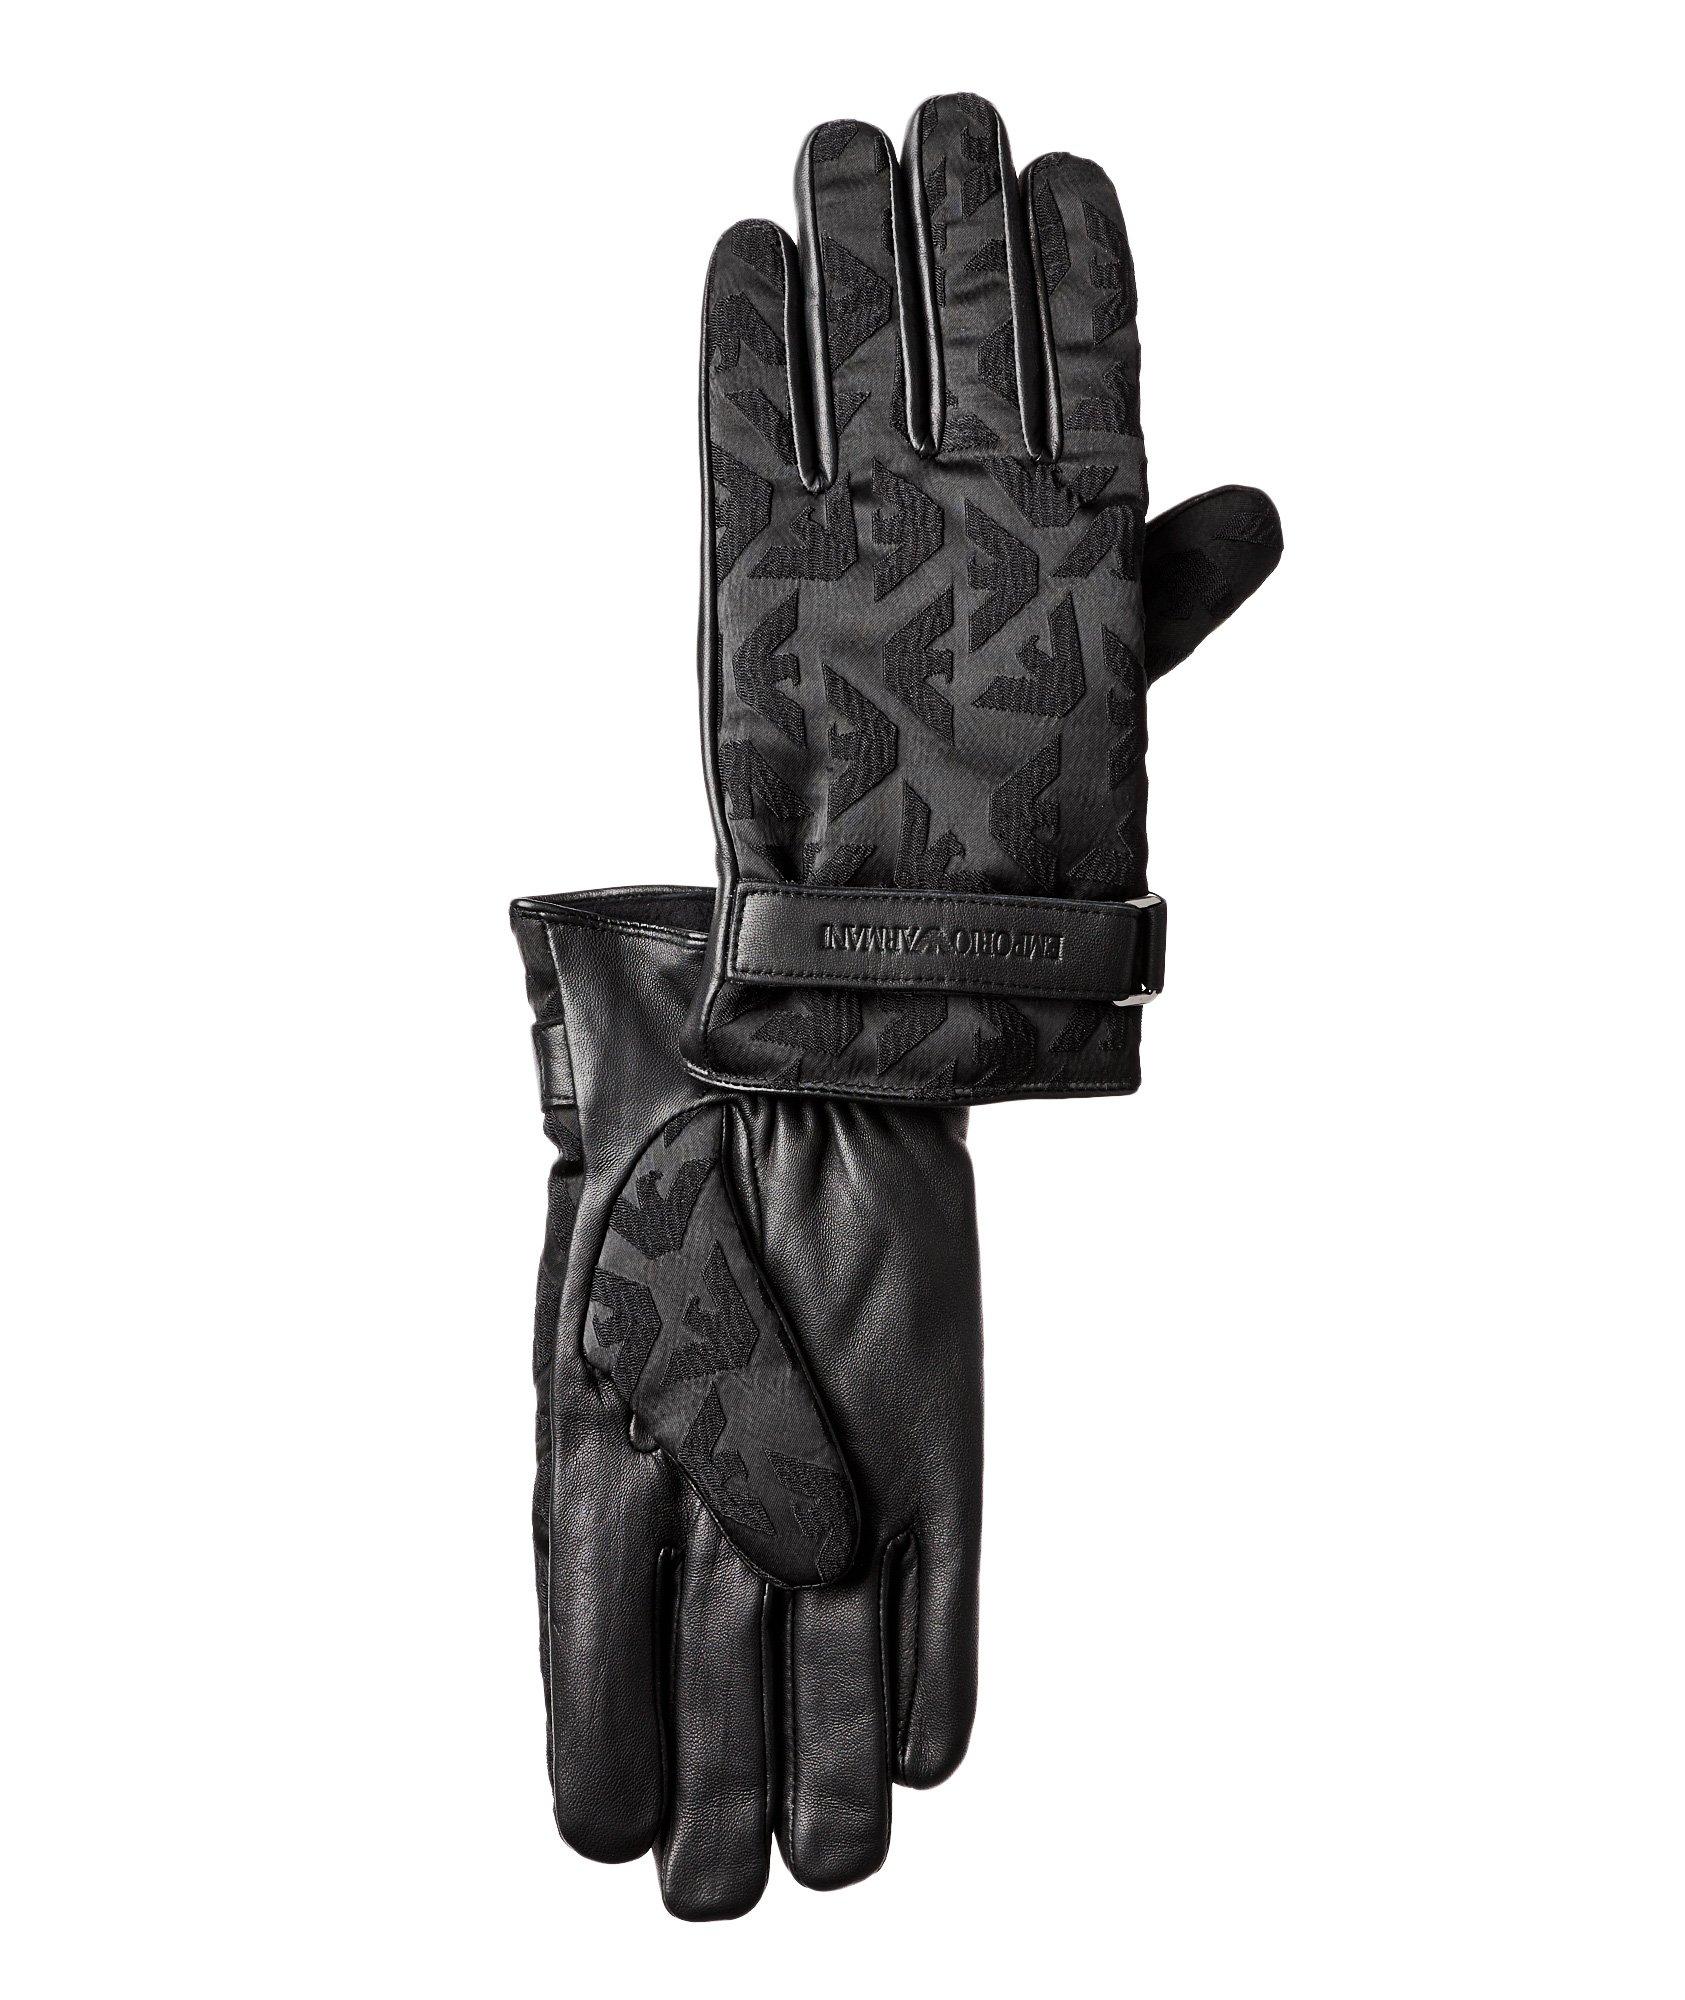 Logo-Embroidered Leather Gloves image 0